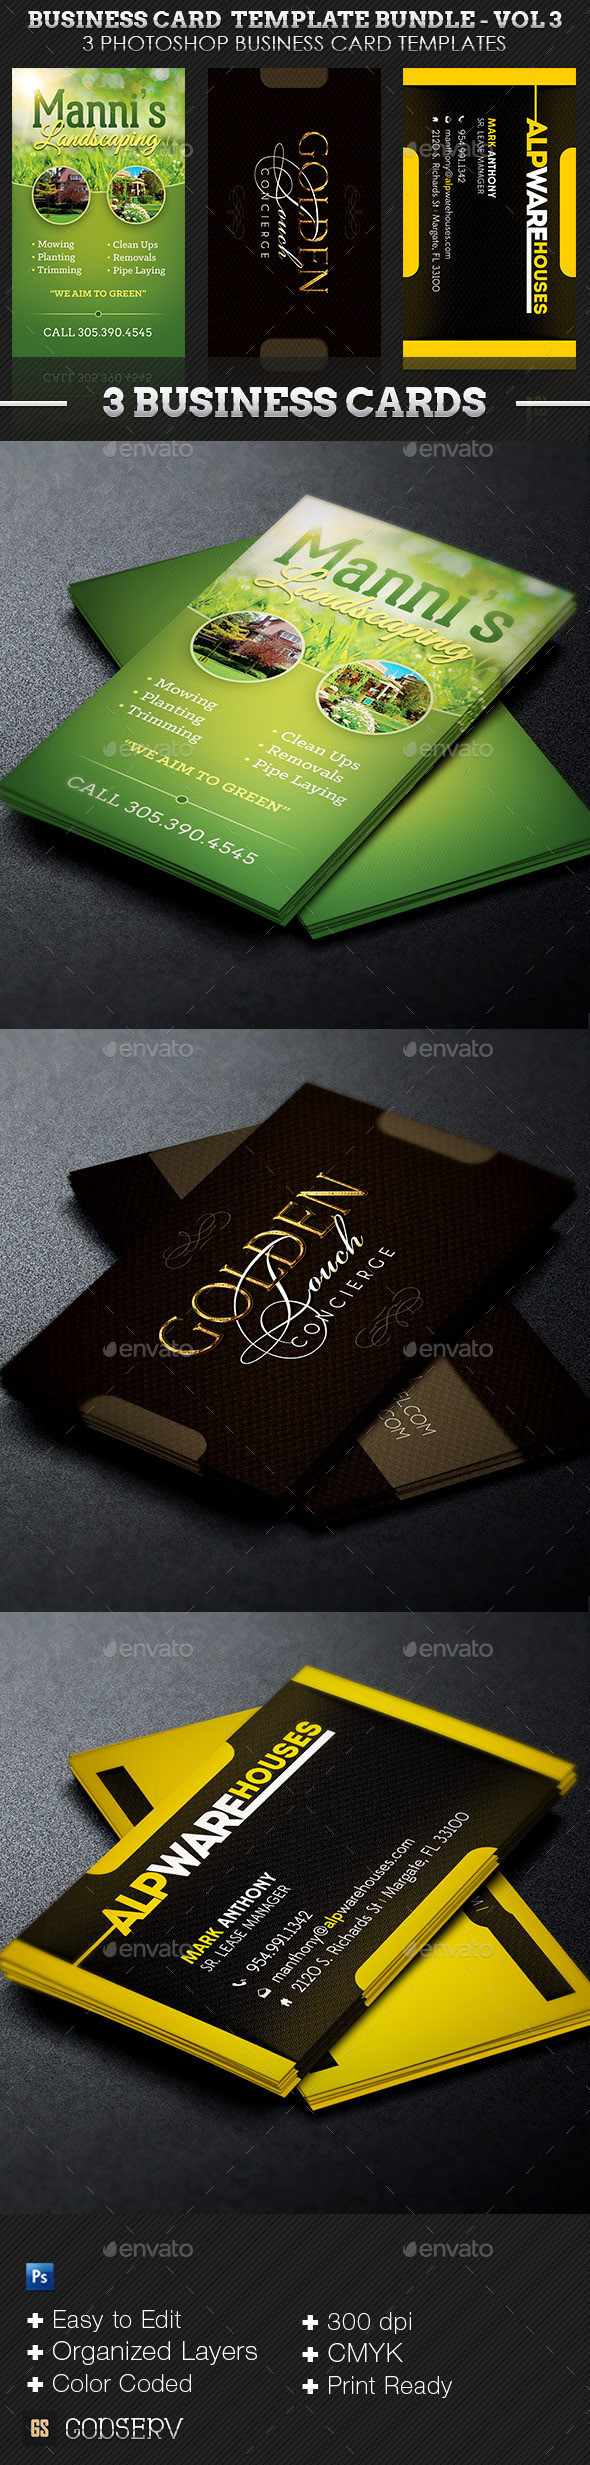 Business card bundle   volume 3 preview